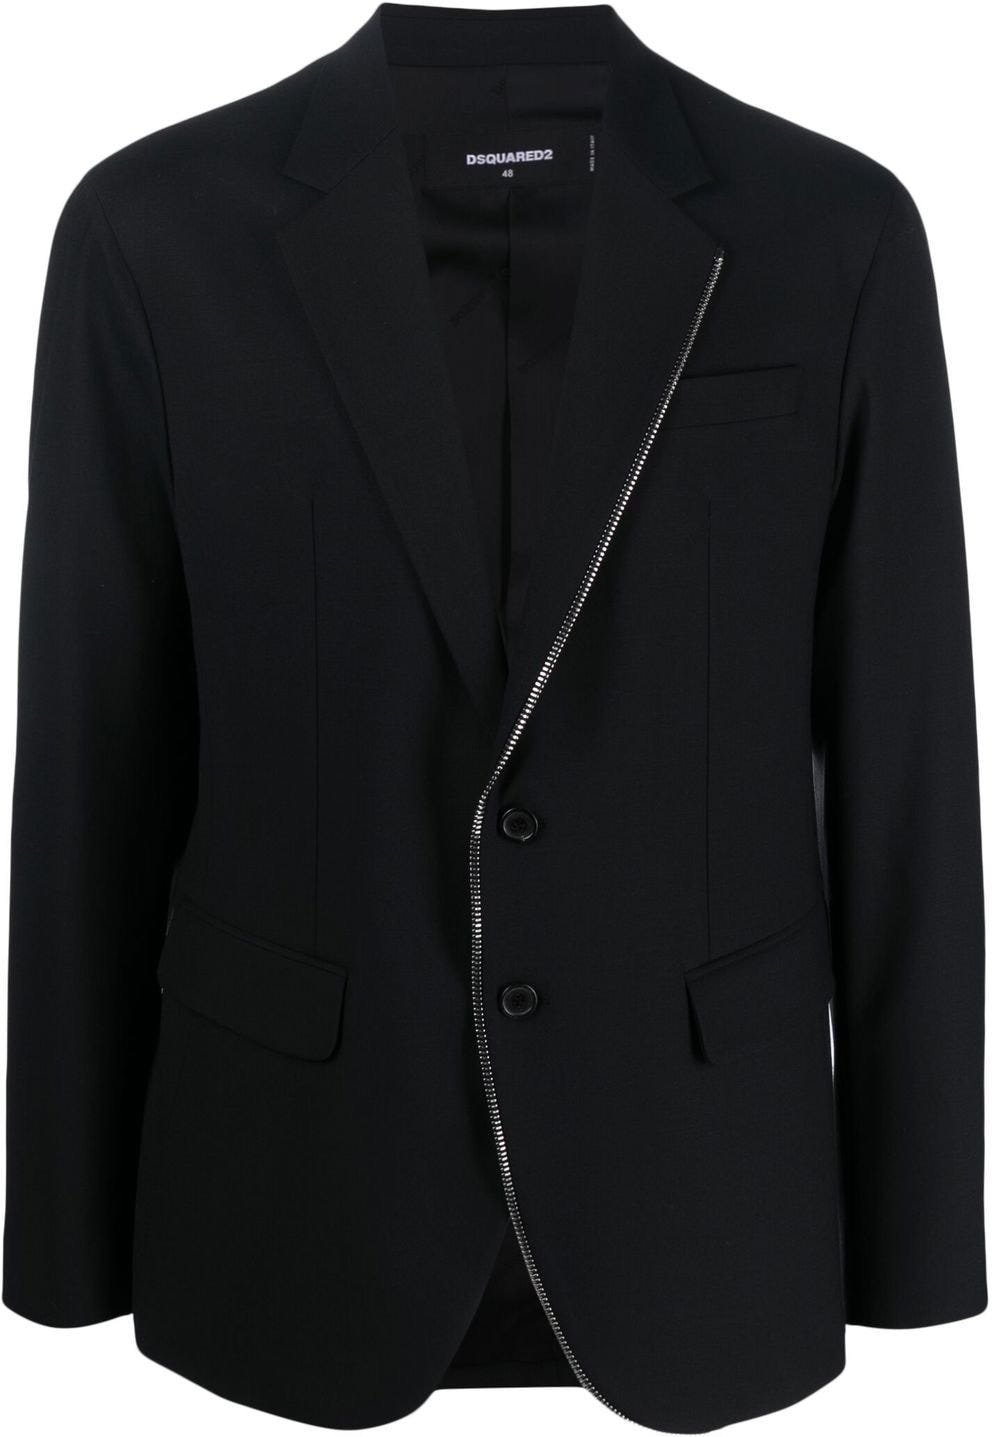 DSQUARED2 BLUE SINGLE-BREASTED BLAZER WITH ZIP DETAIL